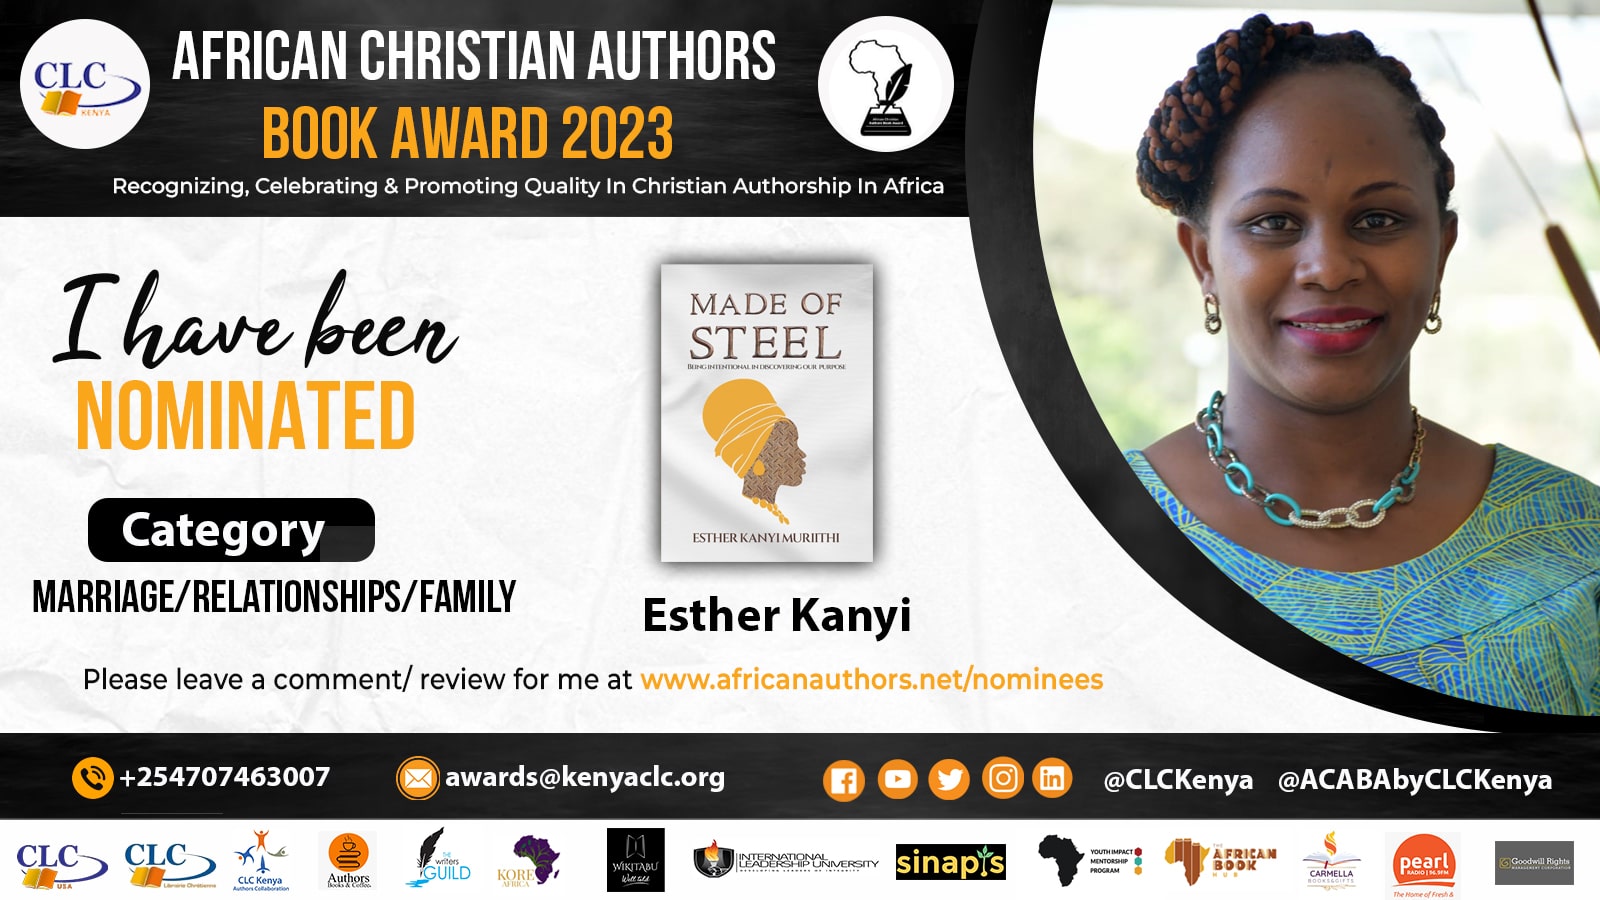 Esther Kanyi Had A Rough Start With The English Language In School, She Still Went On To Author ‘Made Of Steel’